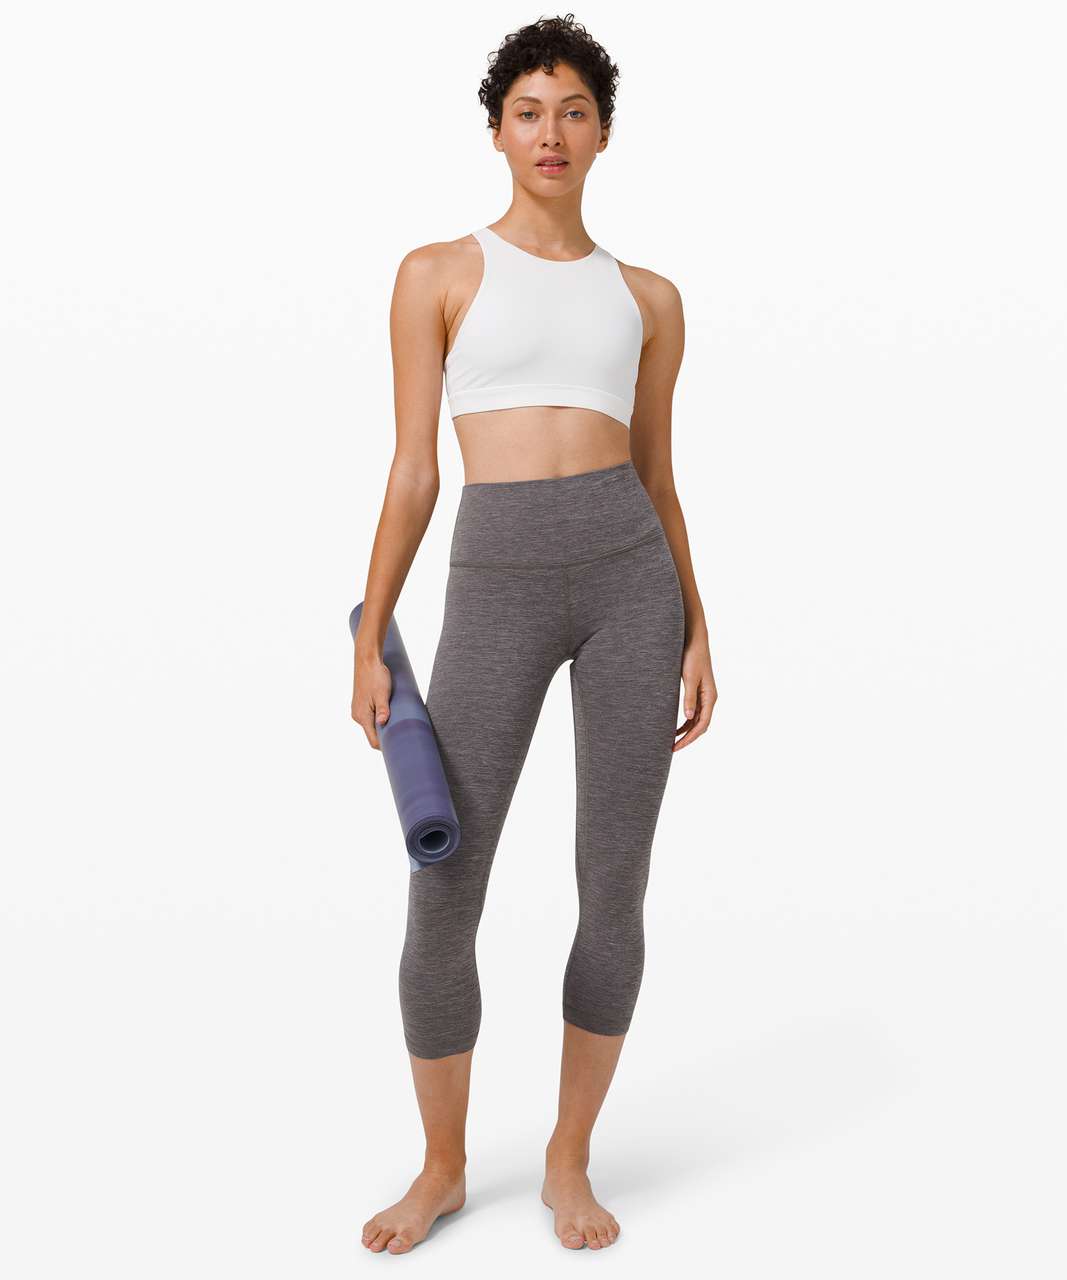 Align Lululemon Leggings Review  International Society of Precision  Agriculture